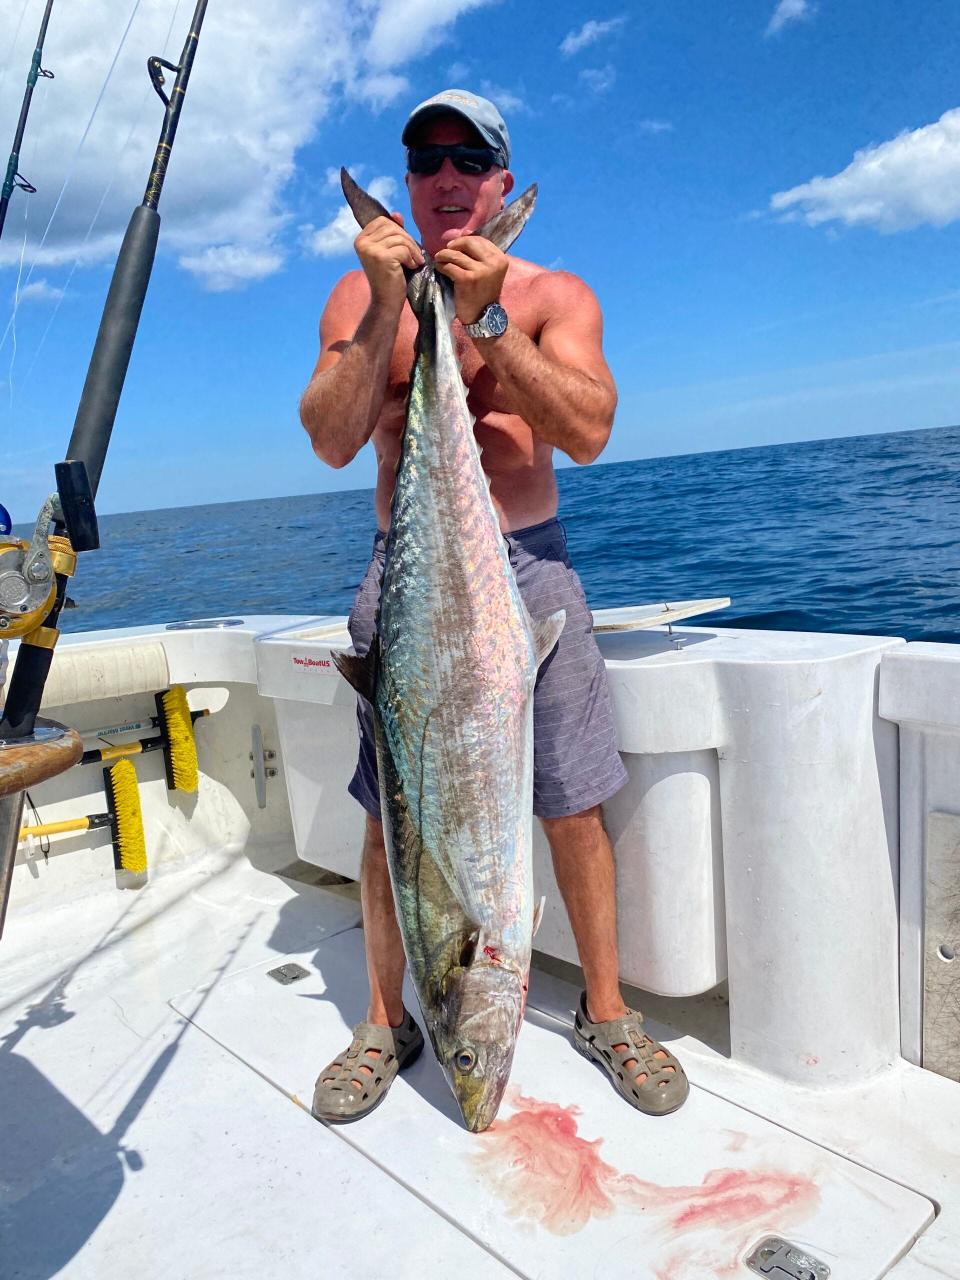 Dominic Vricella of Medford with his New Jersey saltwater rod and reel record 67-pound, 7-ounce king mackerel